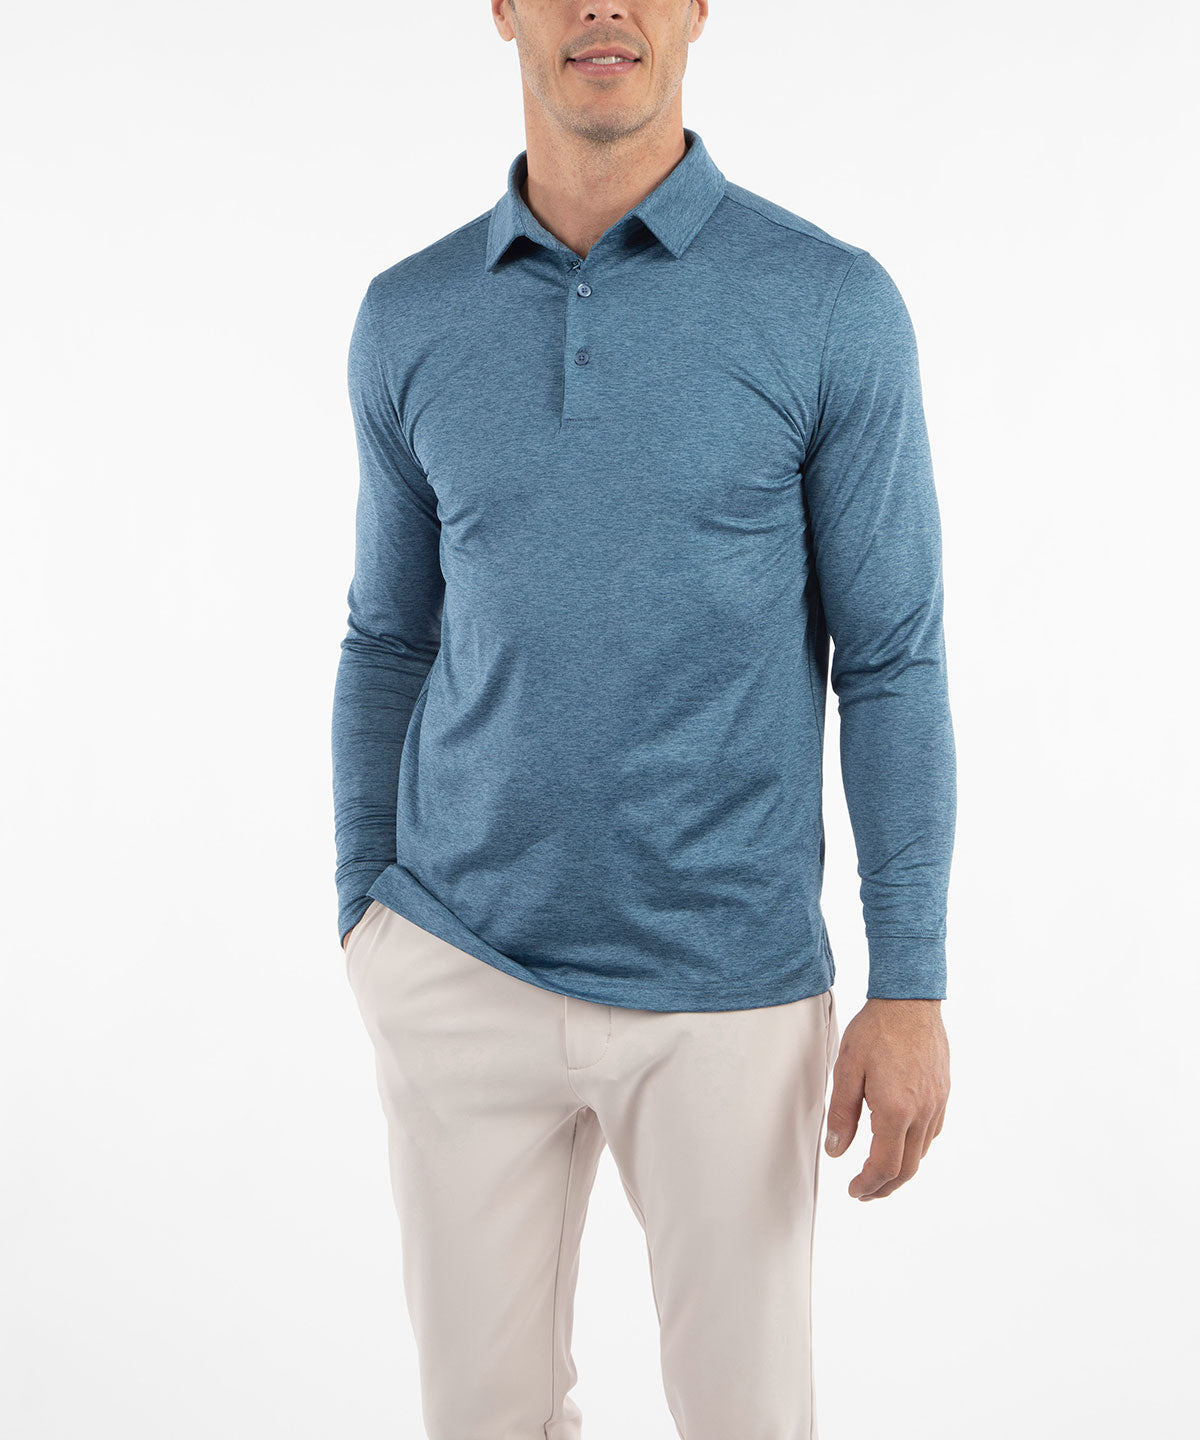 Performance Brushed Poly Flannel Stretch Jersey Polo with Player Placket